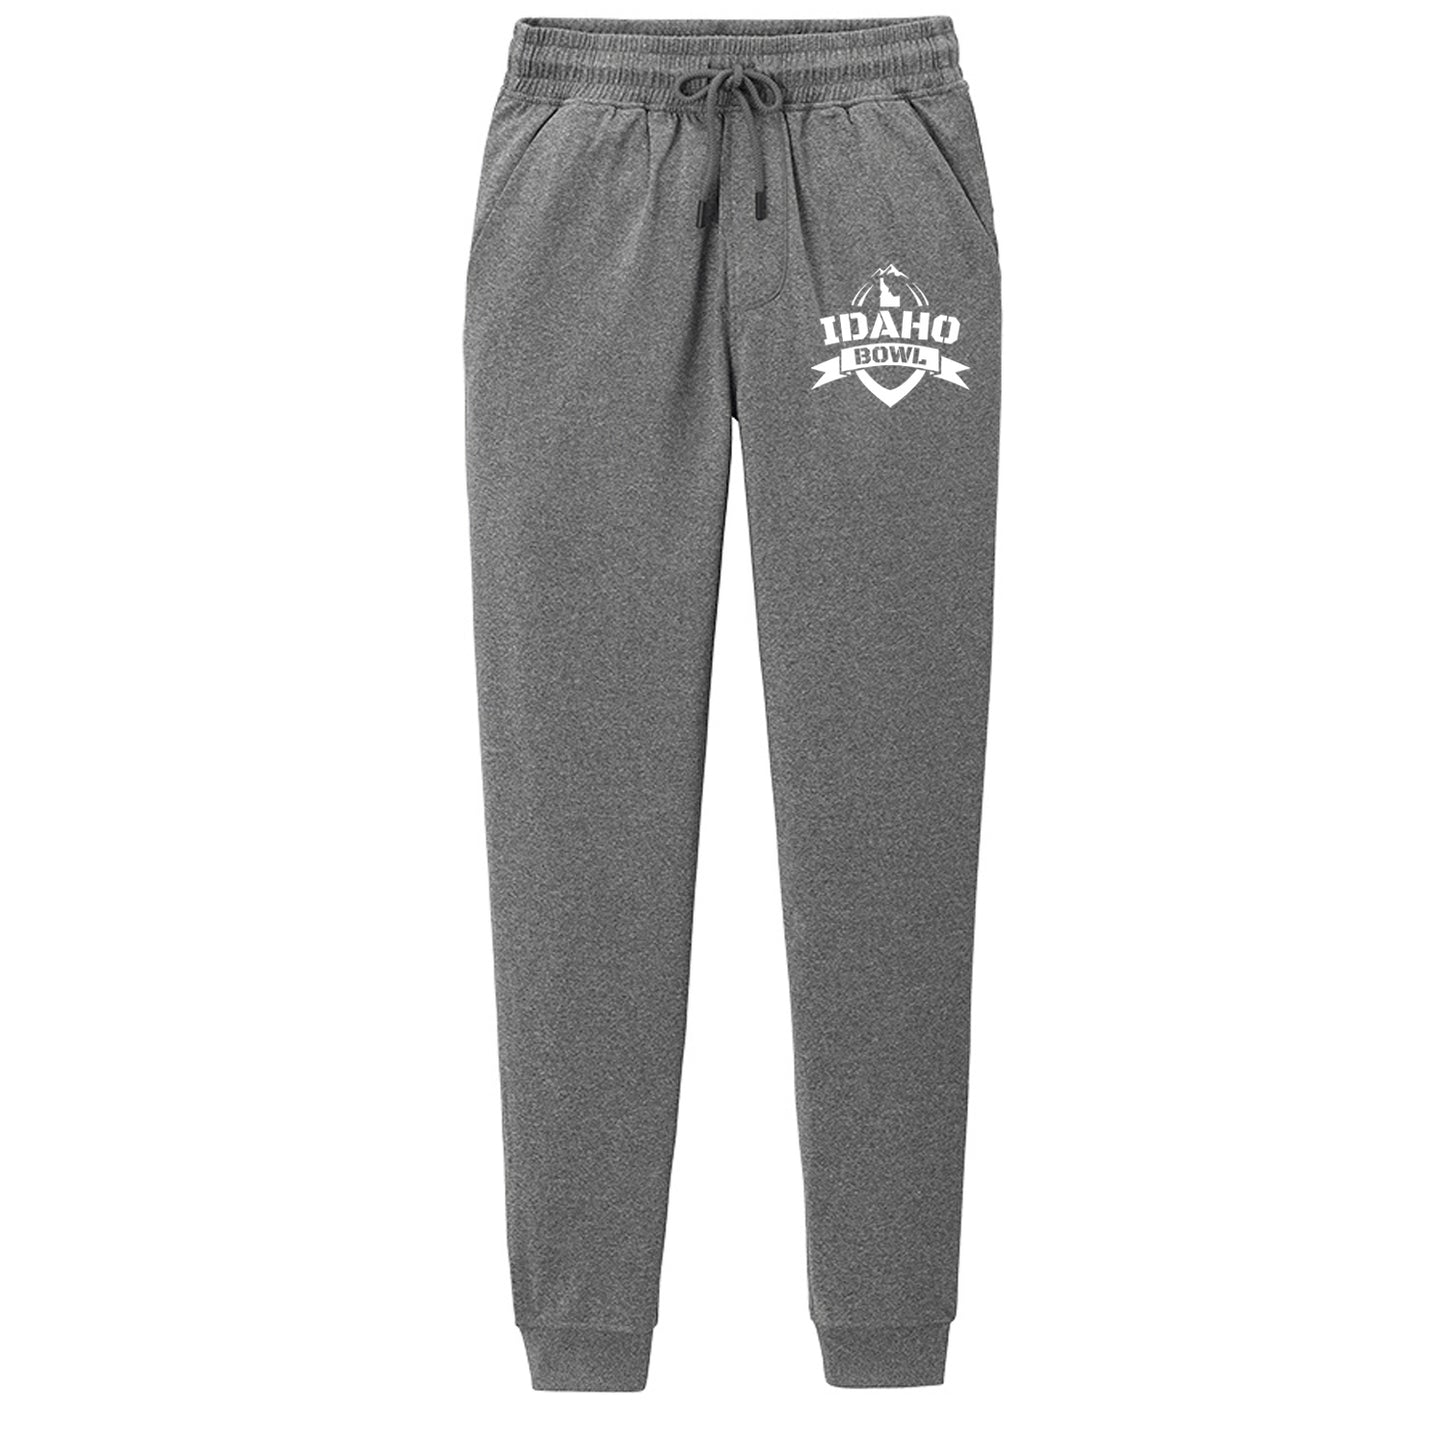 Idaho Bowl - Polyester Stretch Jogger - 2 colors available